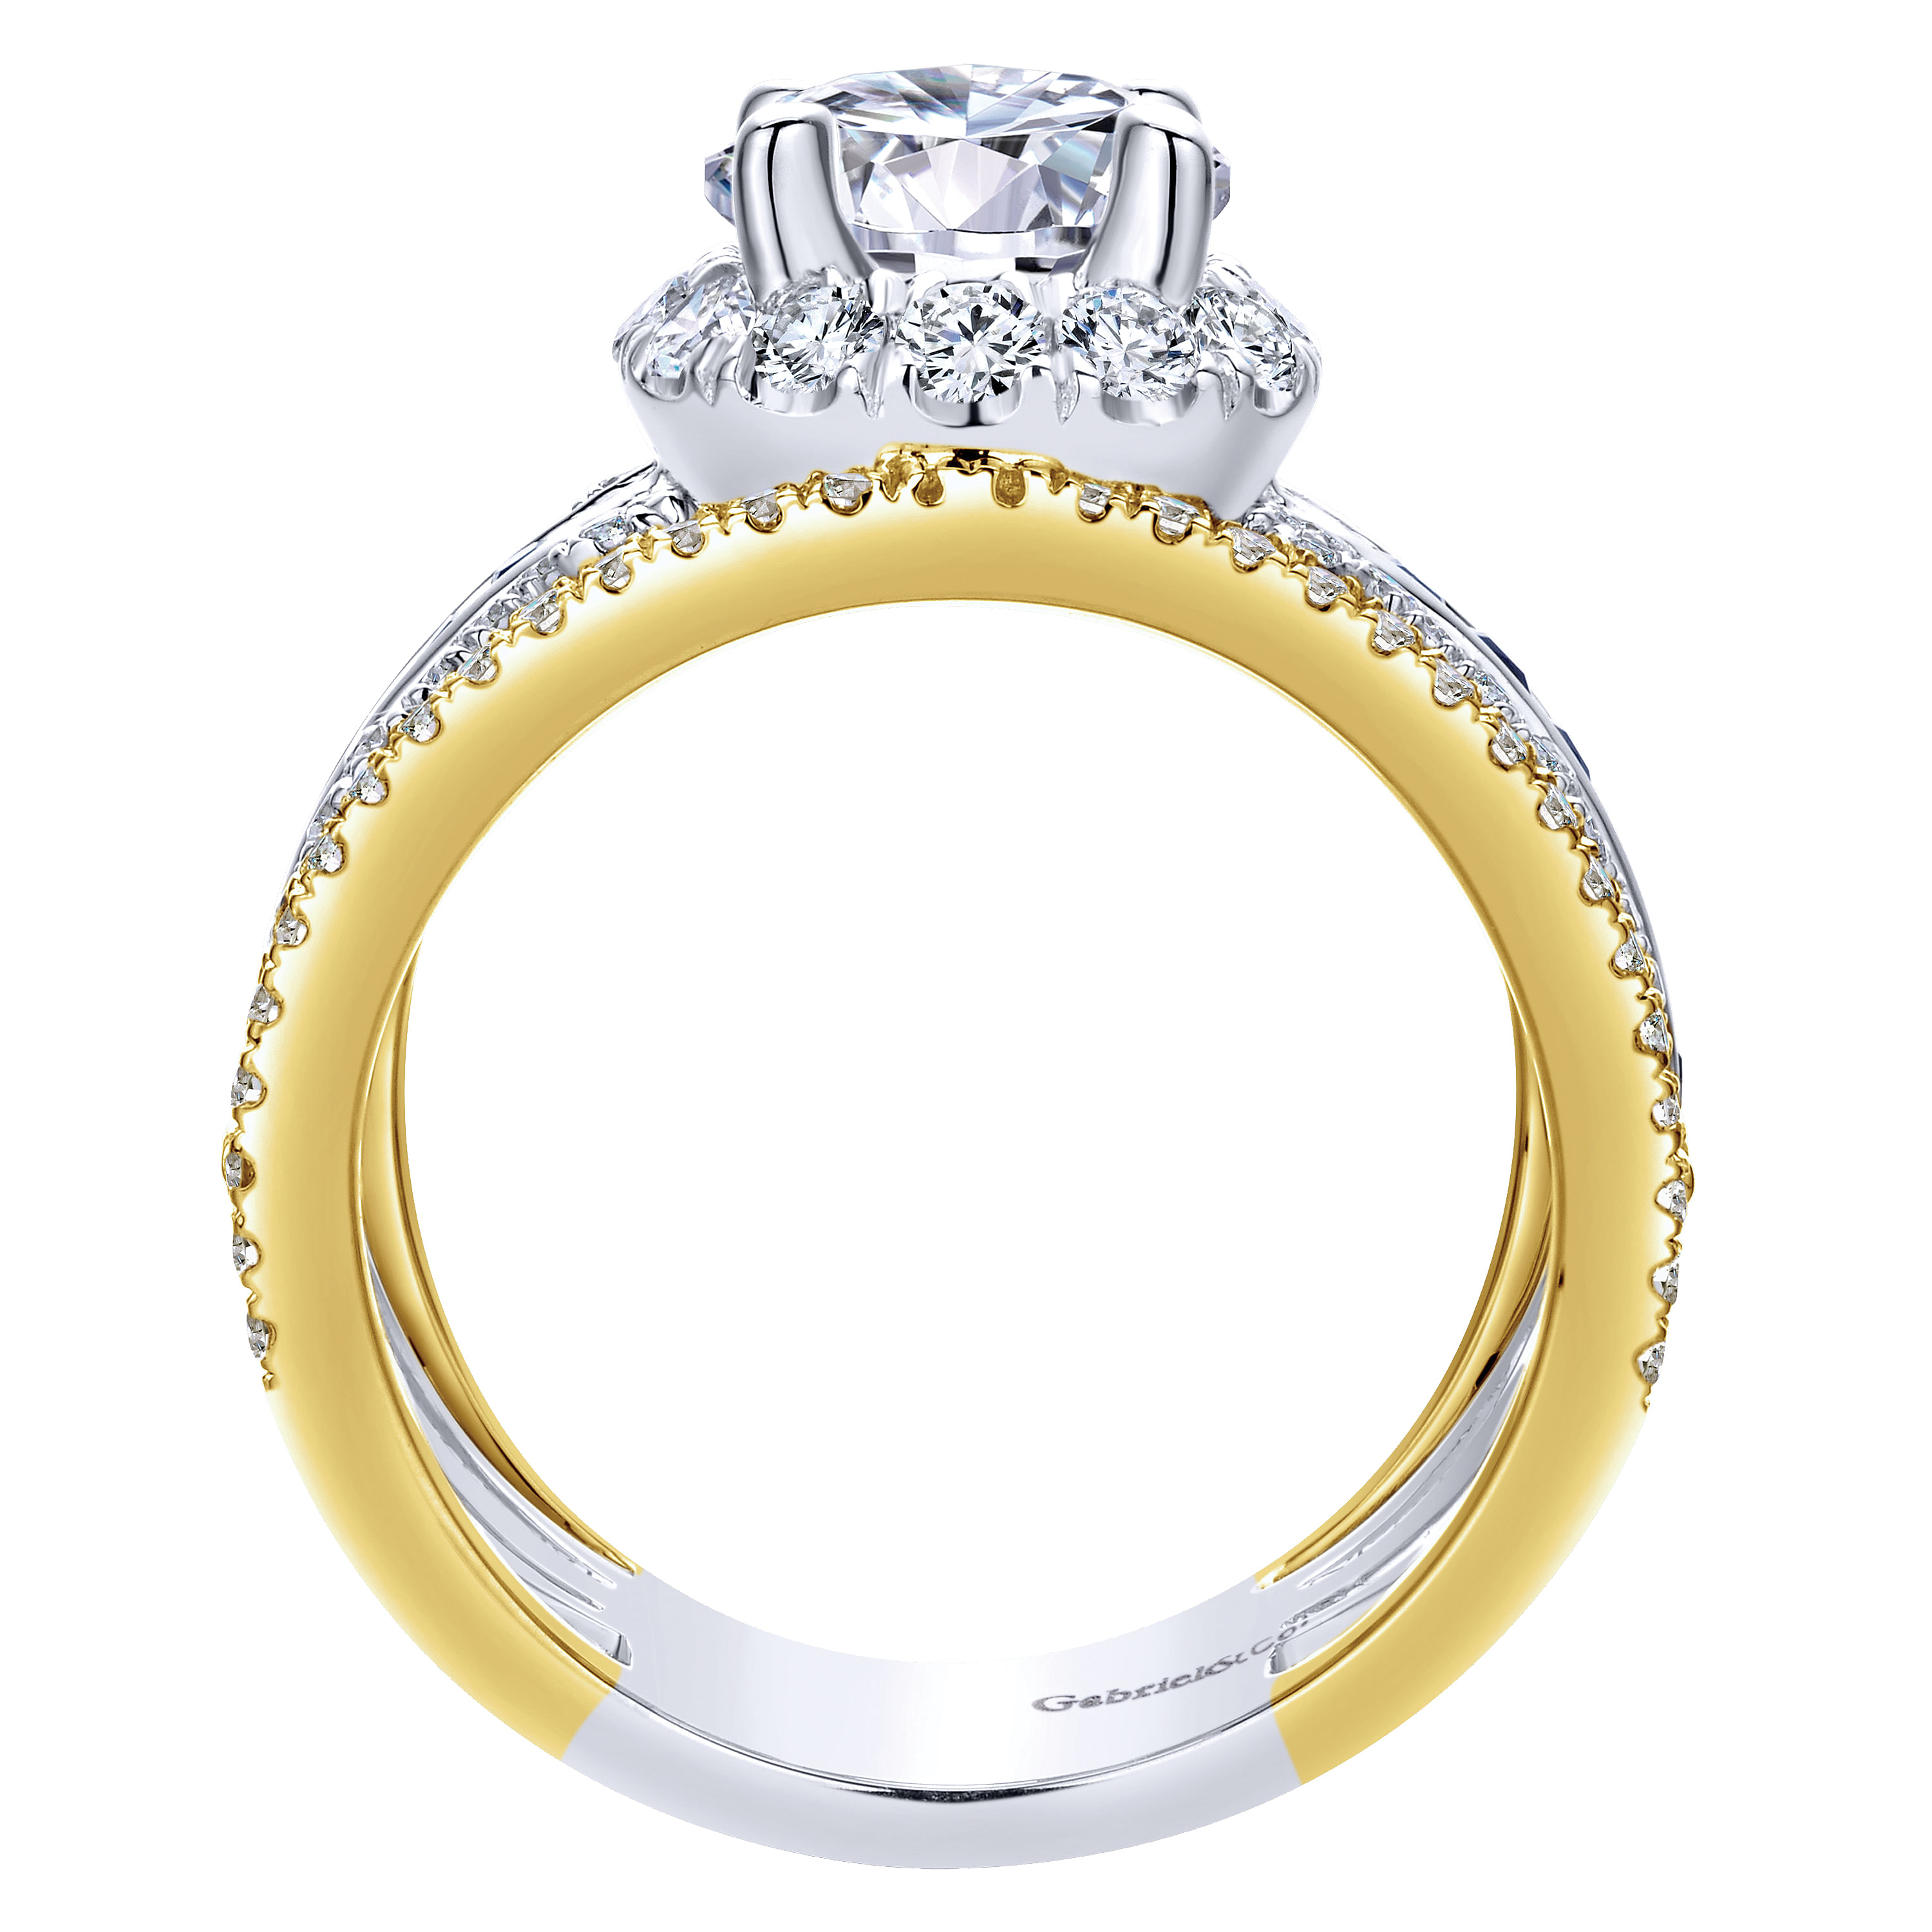 18K White-Yellow Gold Round Halo Sapphire and Diamond Channel Set Engagement Ring